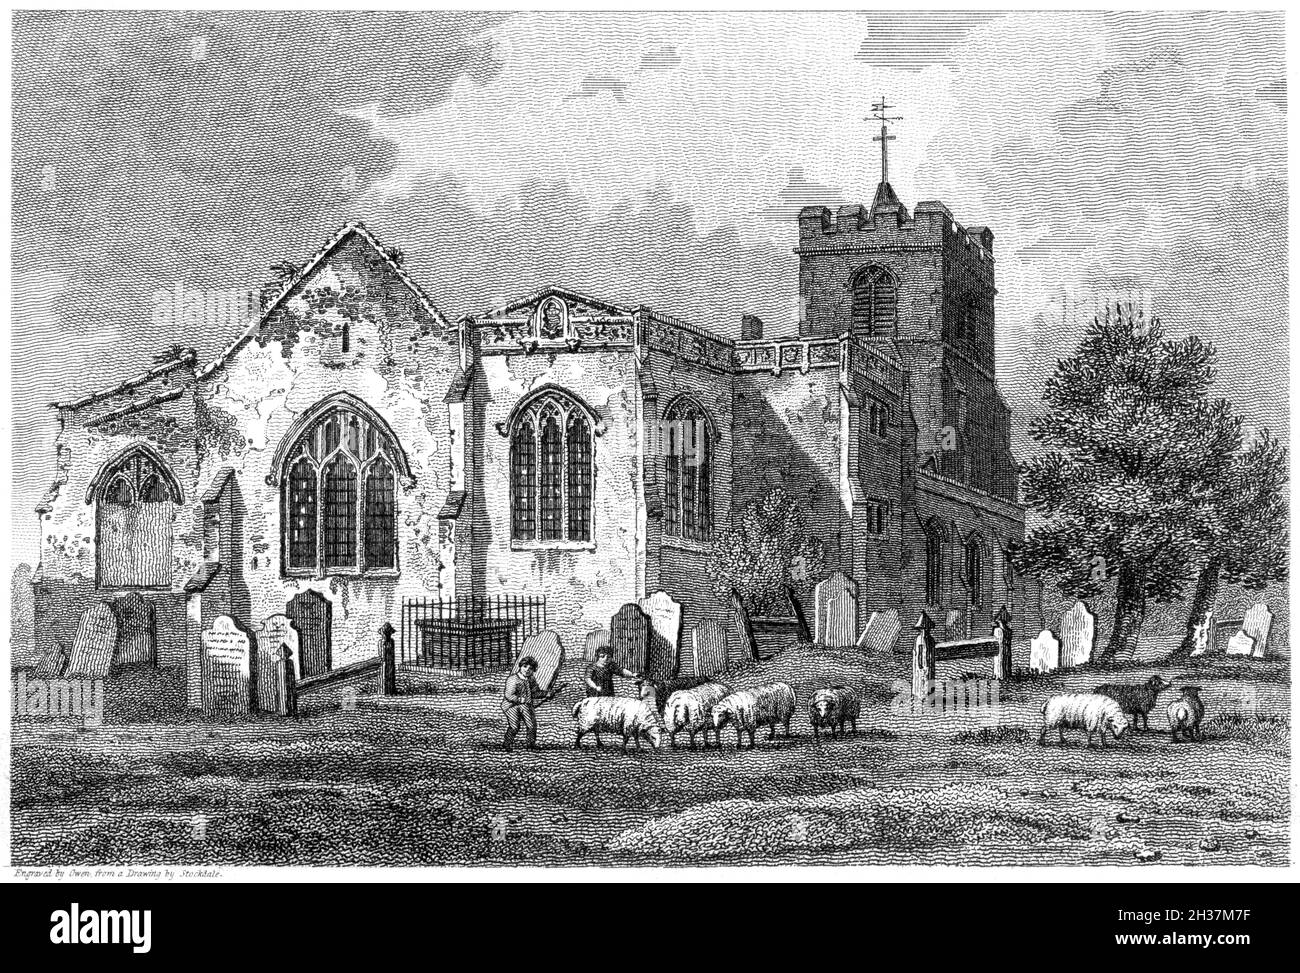 An engraving of Broxbourne Church, Herts. UK scanned at high resolution from a book printed in 1812.  Believed copyright free. Stock Photo